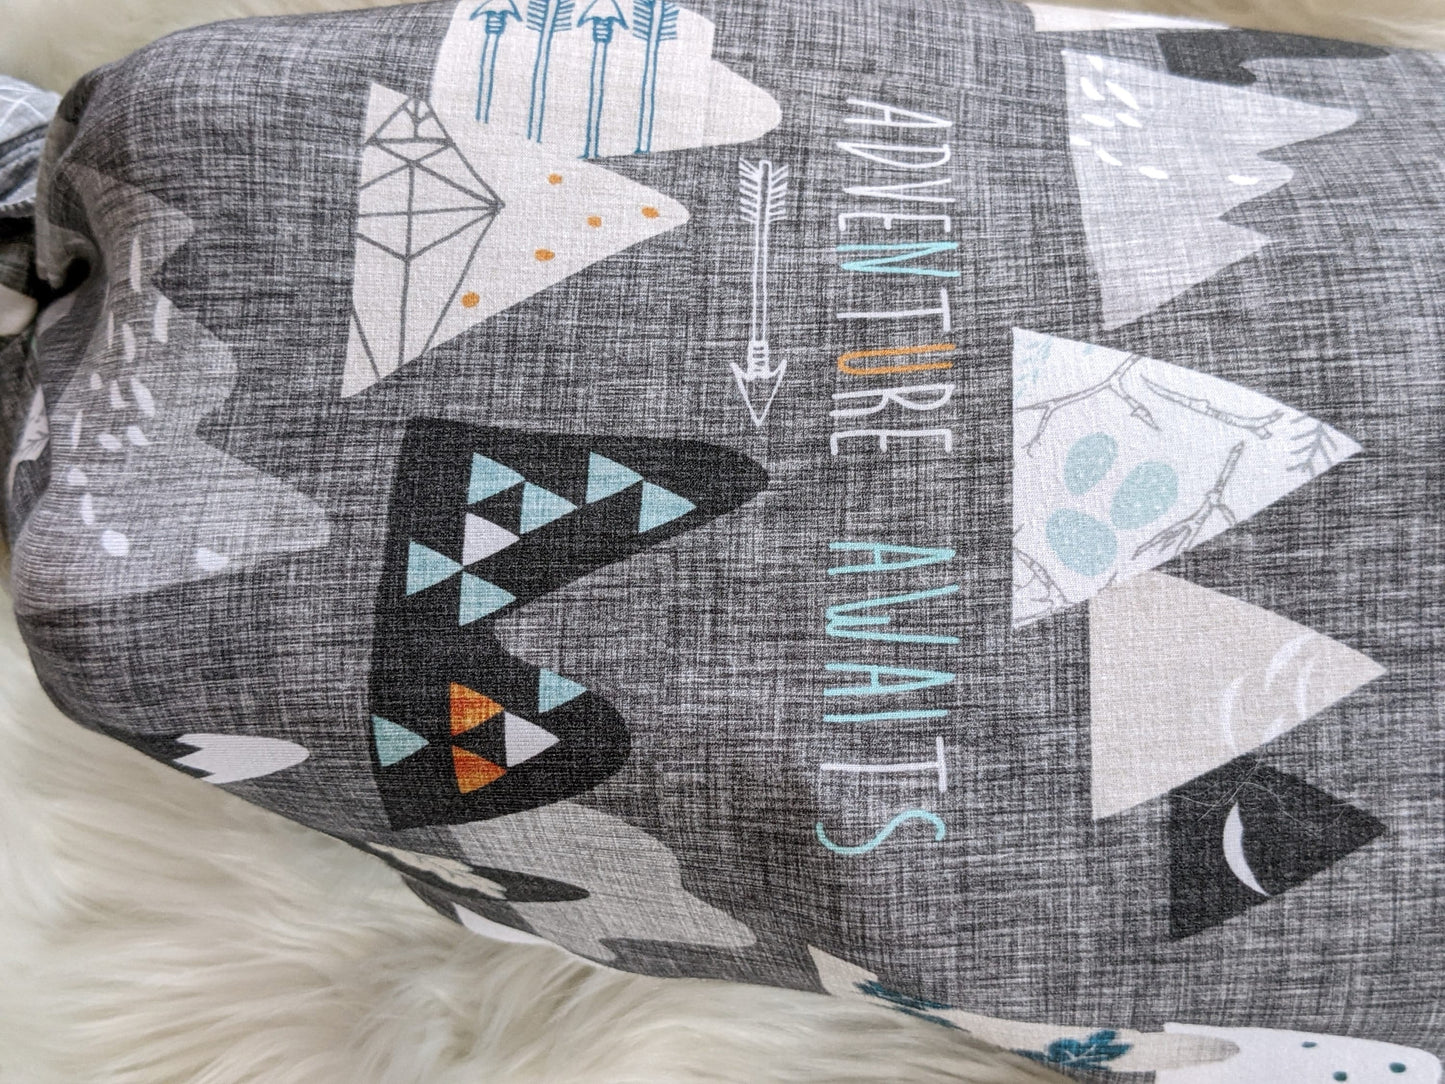 Adventure Awaits Mountain Baby Blanket + Matching Hat or Headband in Charcoal Gray,Outdoorsy,Whimsy